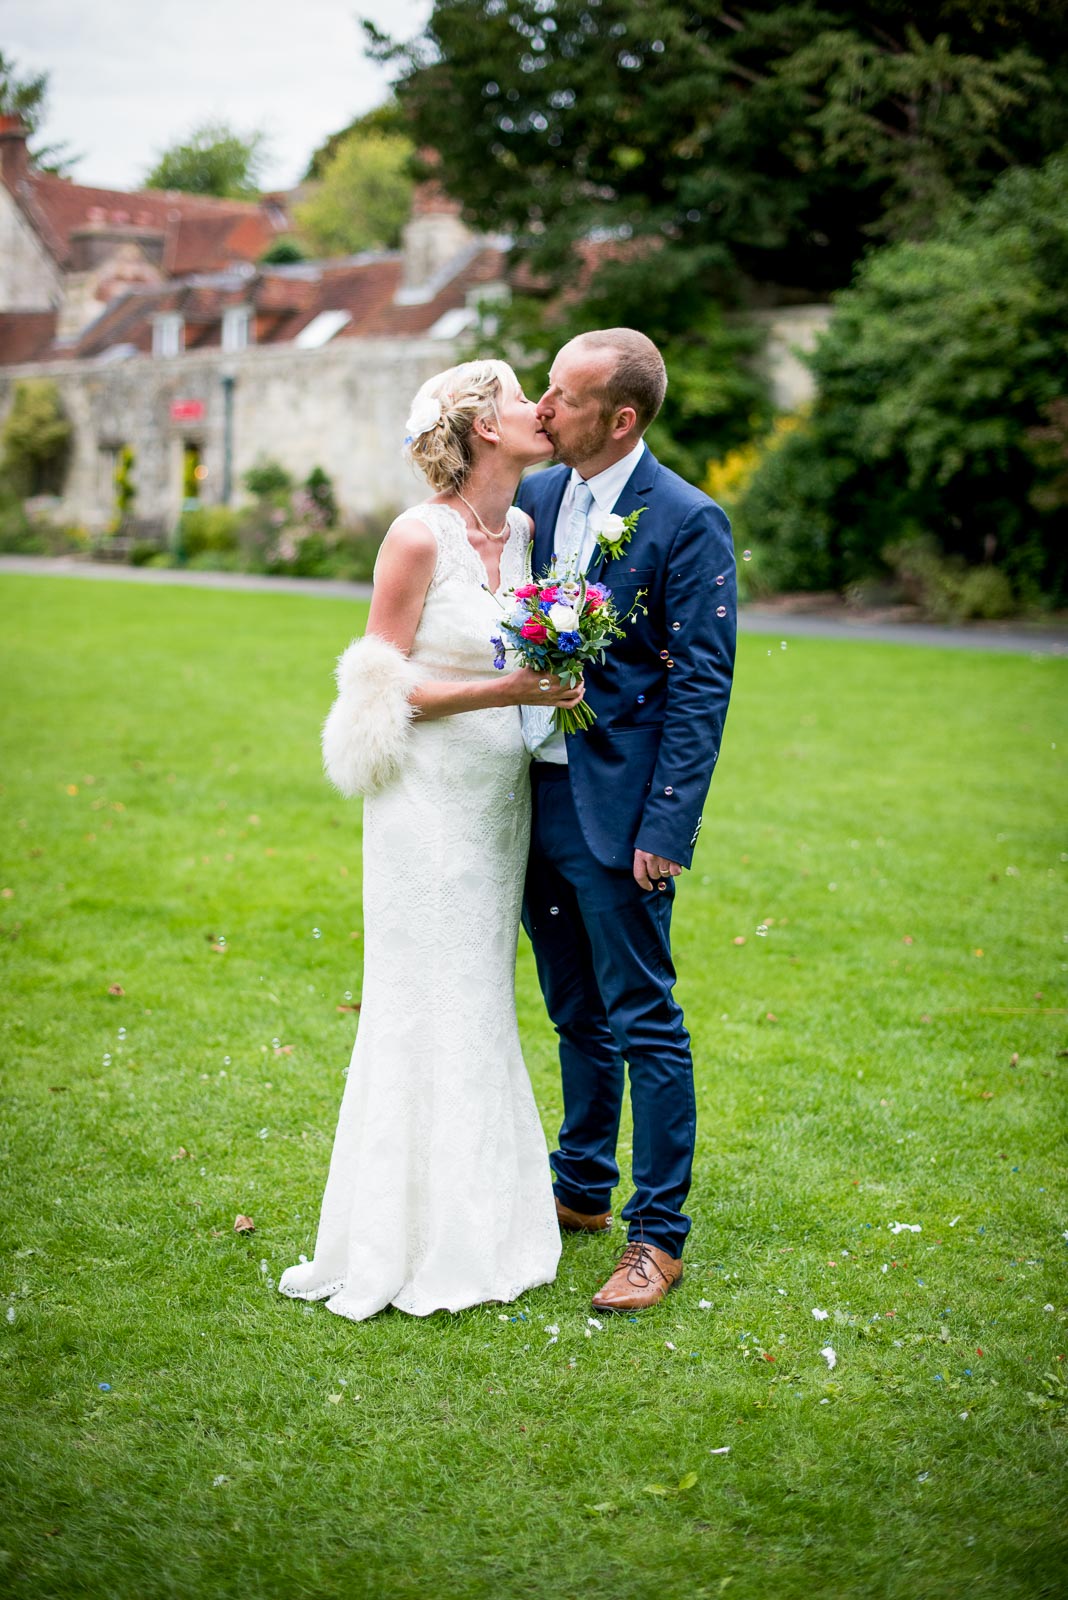 Emily and Richard embrace in Southover Grange, Lewes after their wedding.